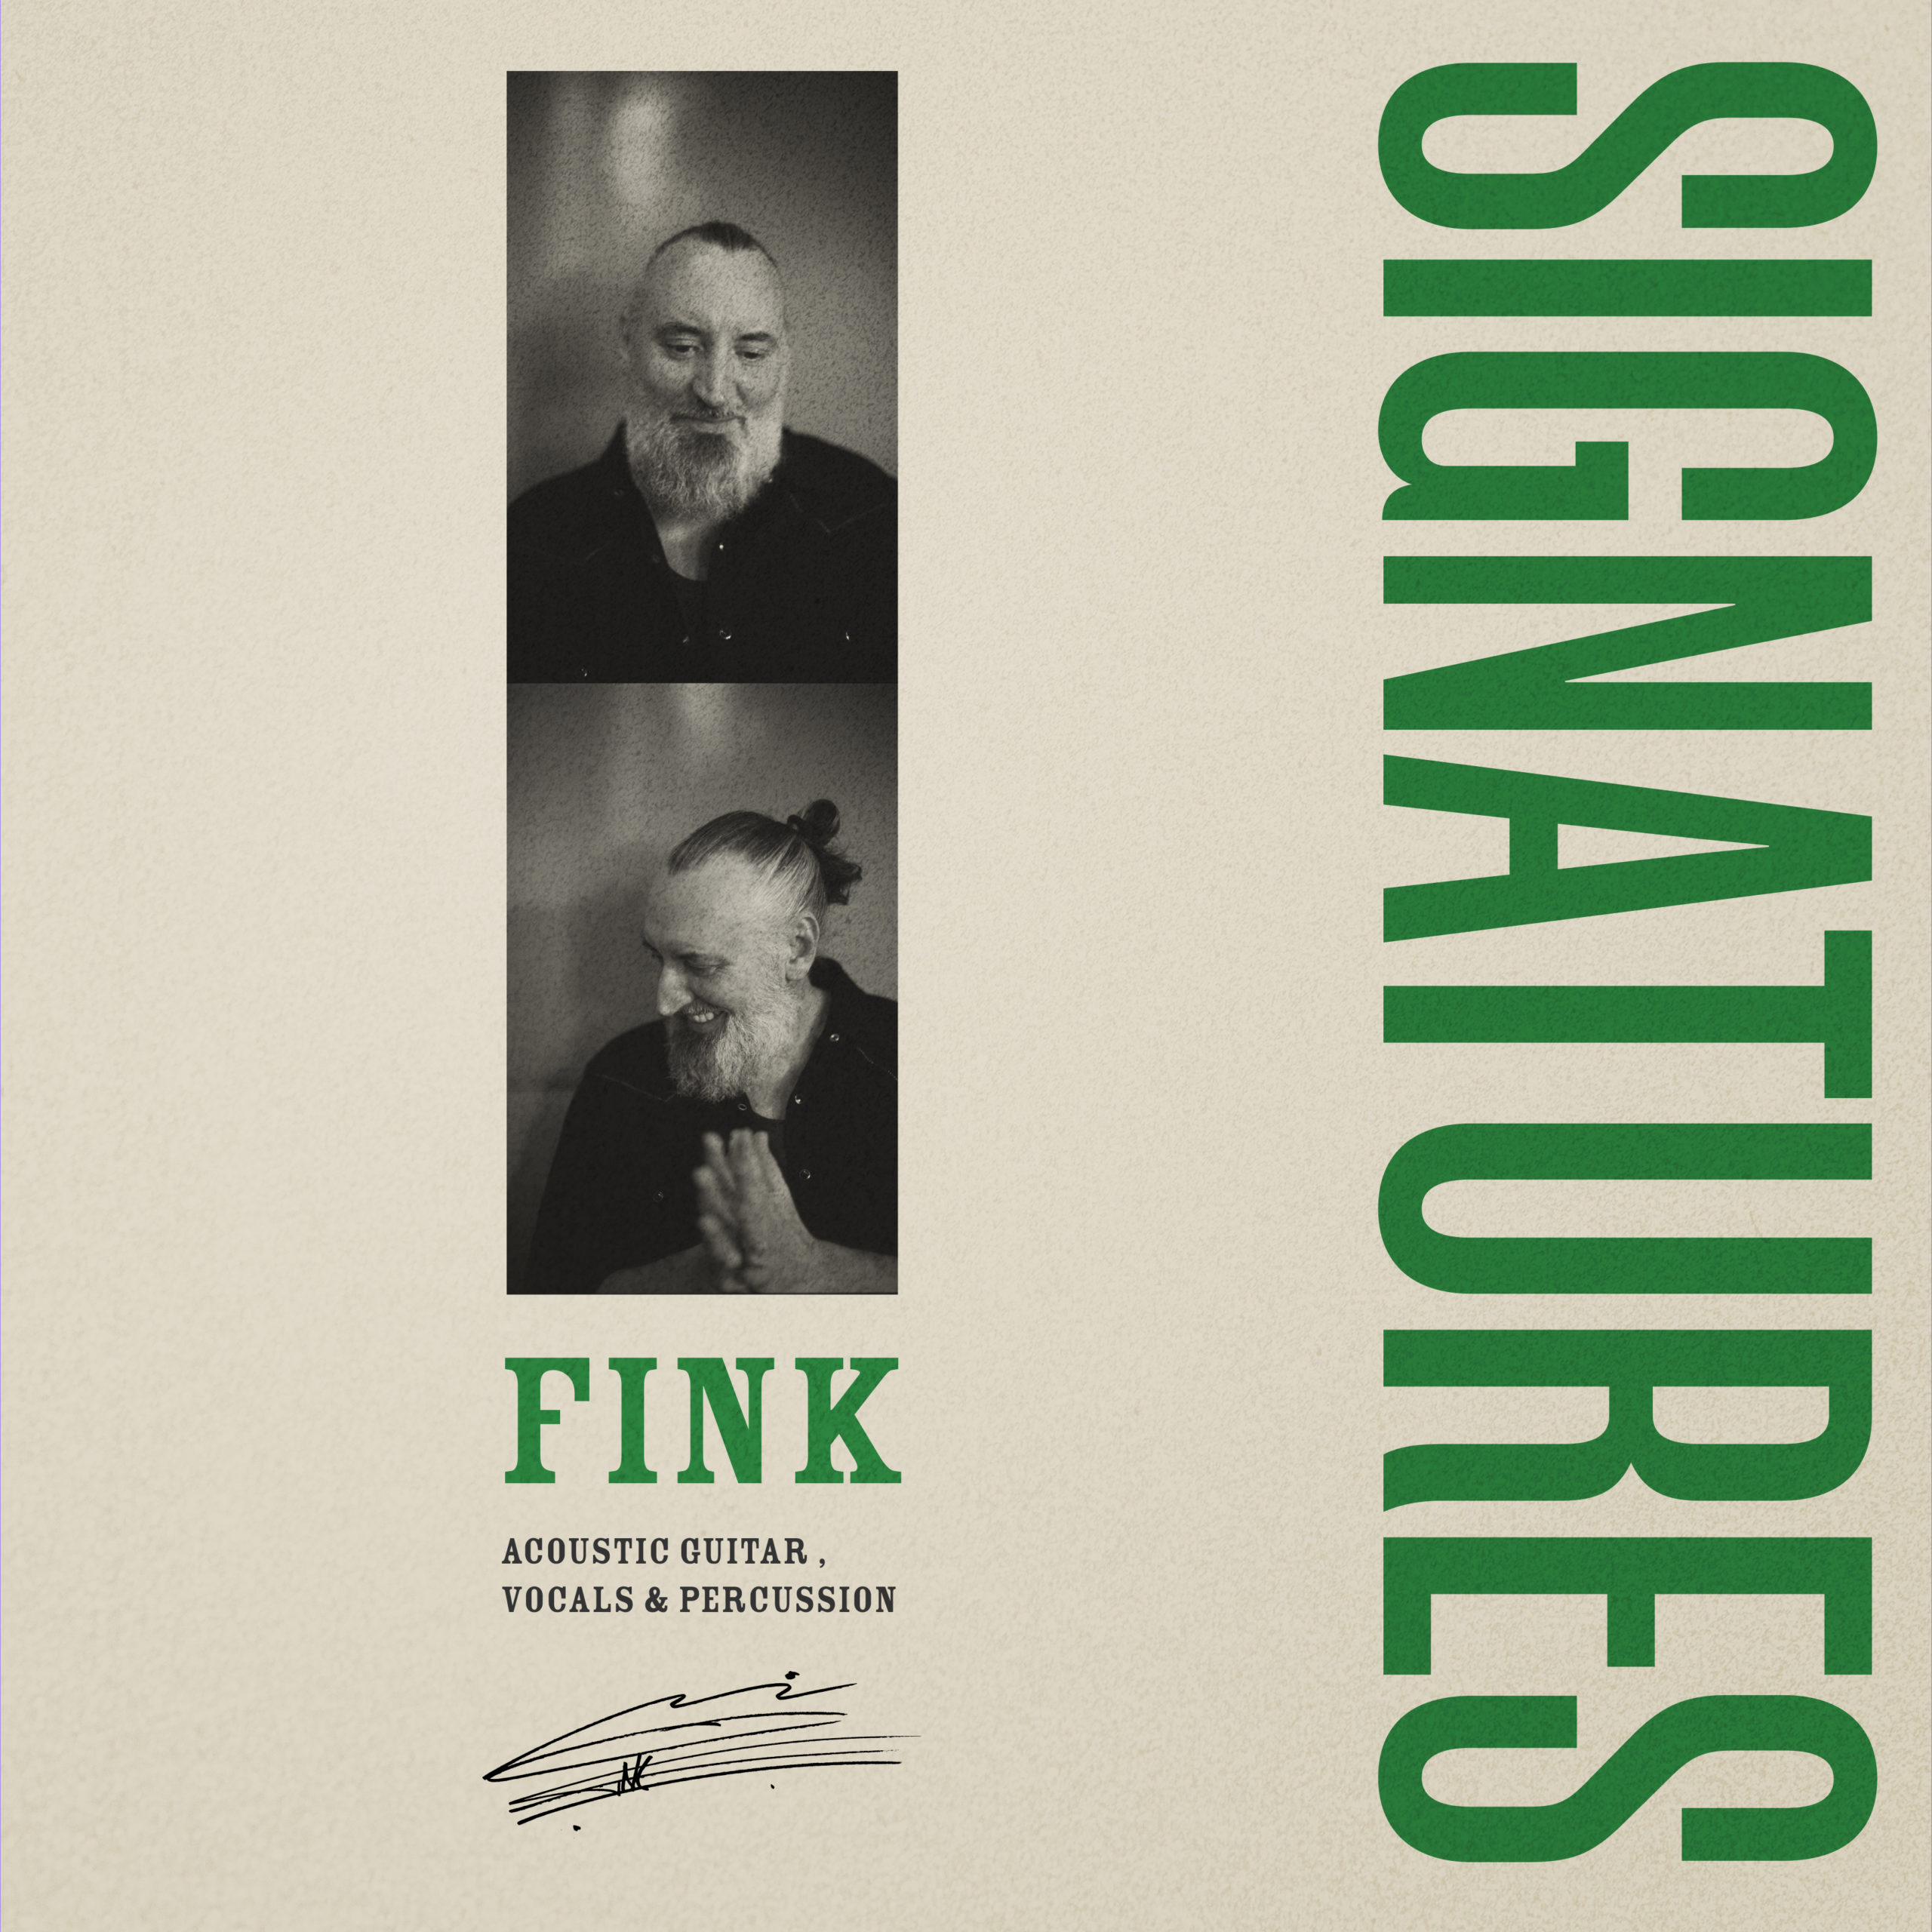 Review of FINK SIGNATURES A Definitive Acoustic Guitar Toolkit with Signature Sound square scaled